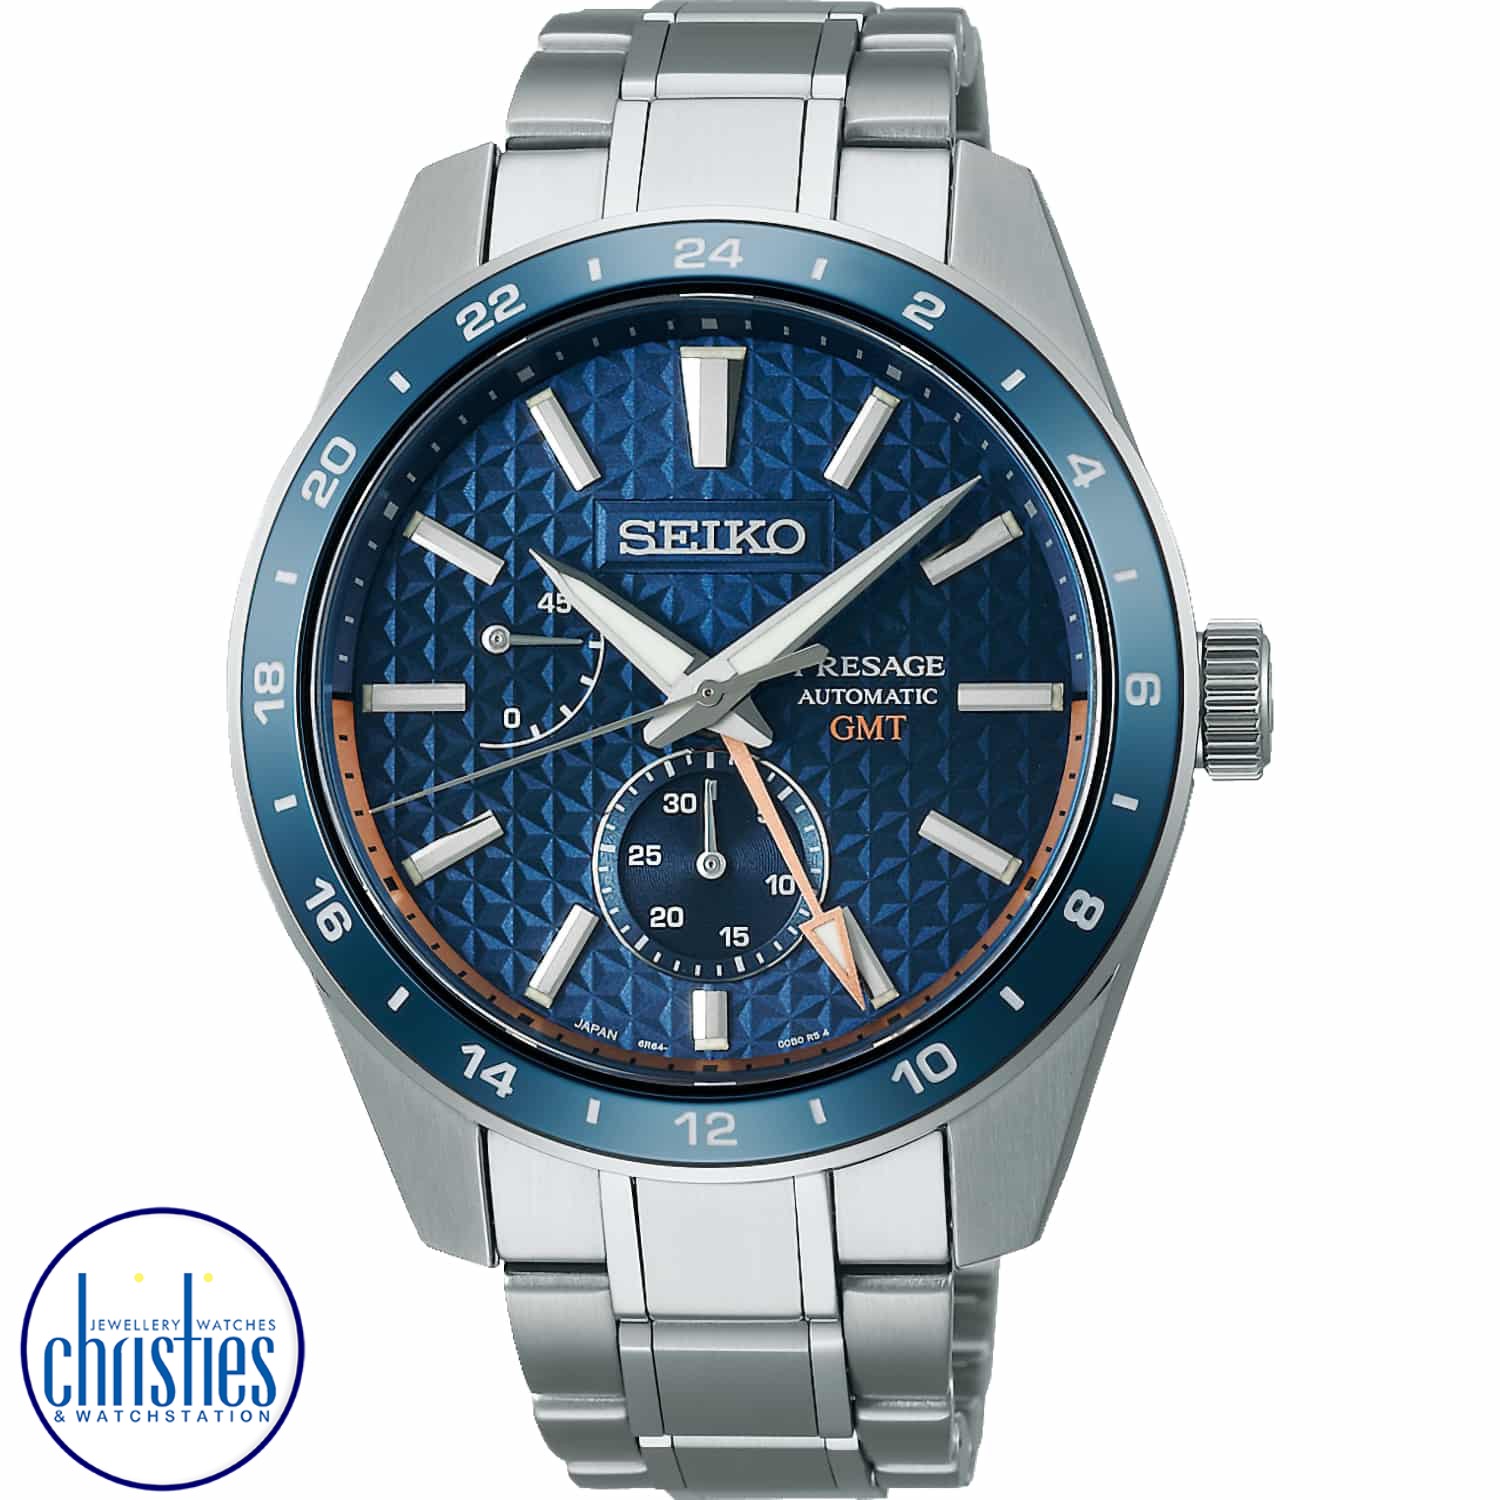 SPB217J Seiko Presage Automatic G.M.T Watch. The SRPH53K1 Seiko 5 Sports V8 Supercars Limited Edition Watch is almost here! Arriving the first week of Oct 2021. - Limited edition of 2021 pieces. Order now so not to miss out.   Aft fossil sm